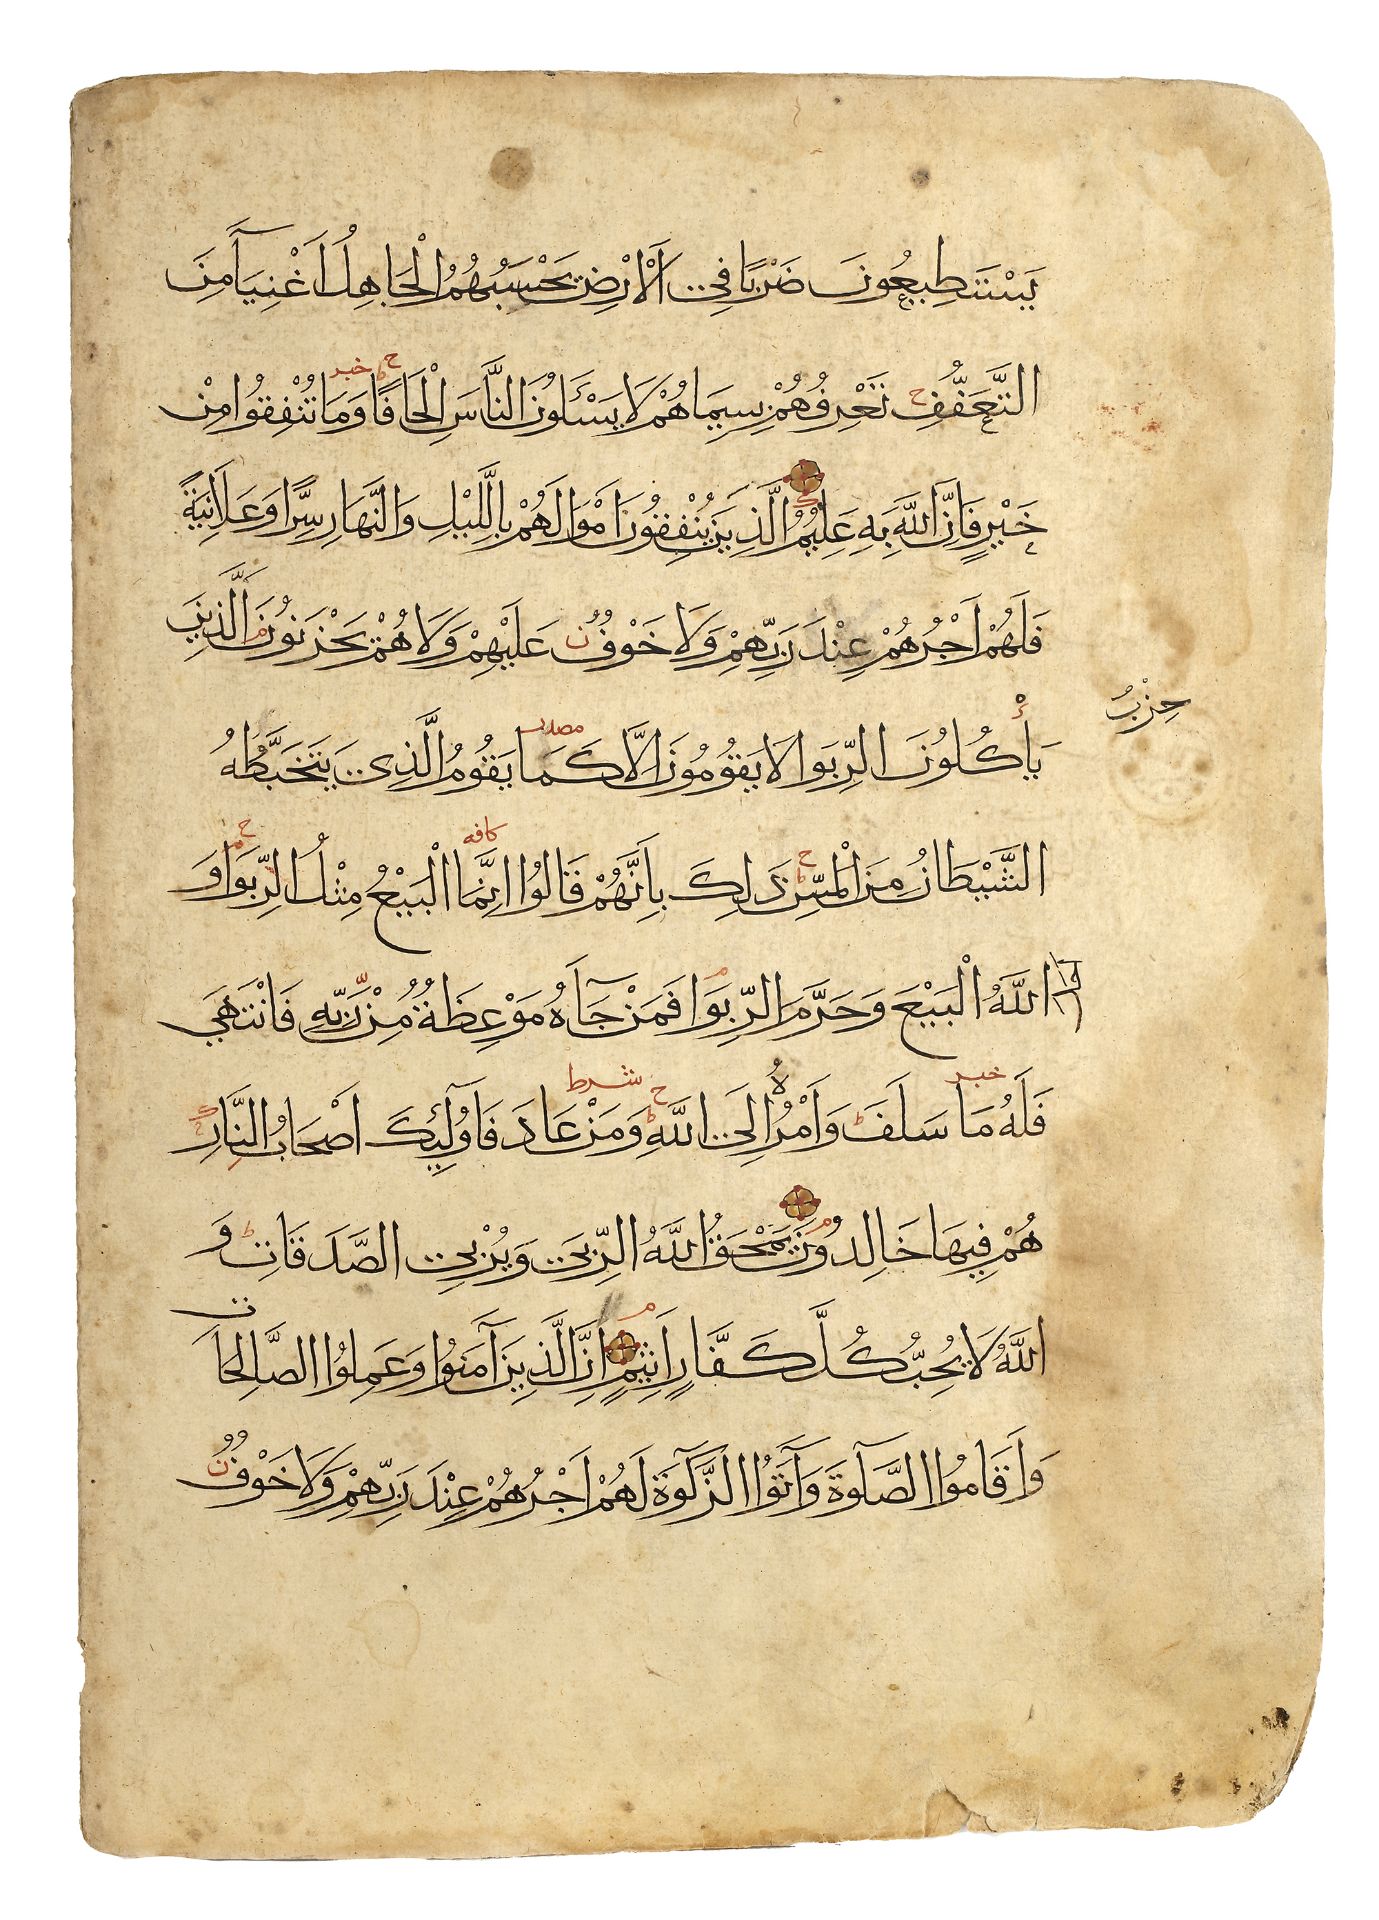 TWO QURAN PAGES, OTTOMAN, 14TH CENTURY - Image 3 of 5